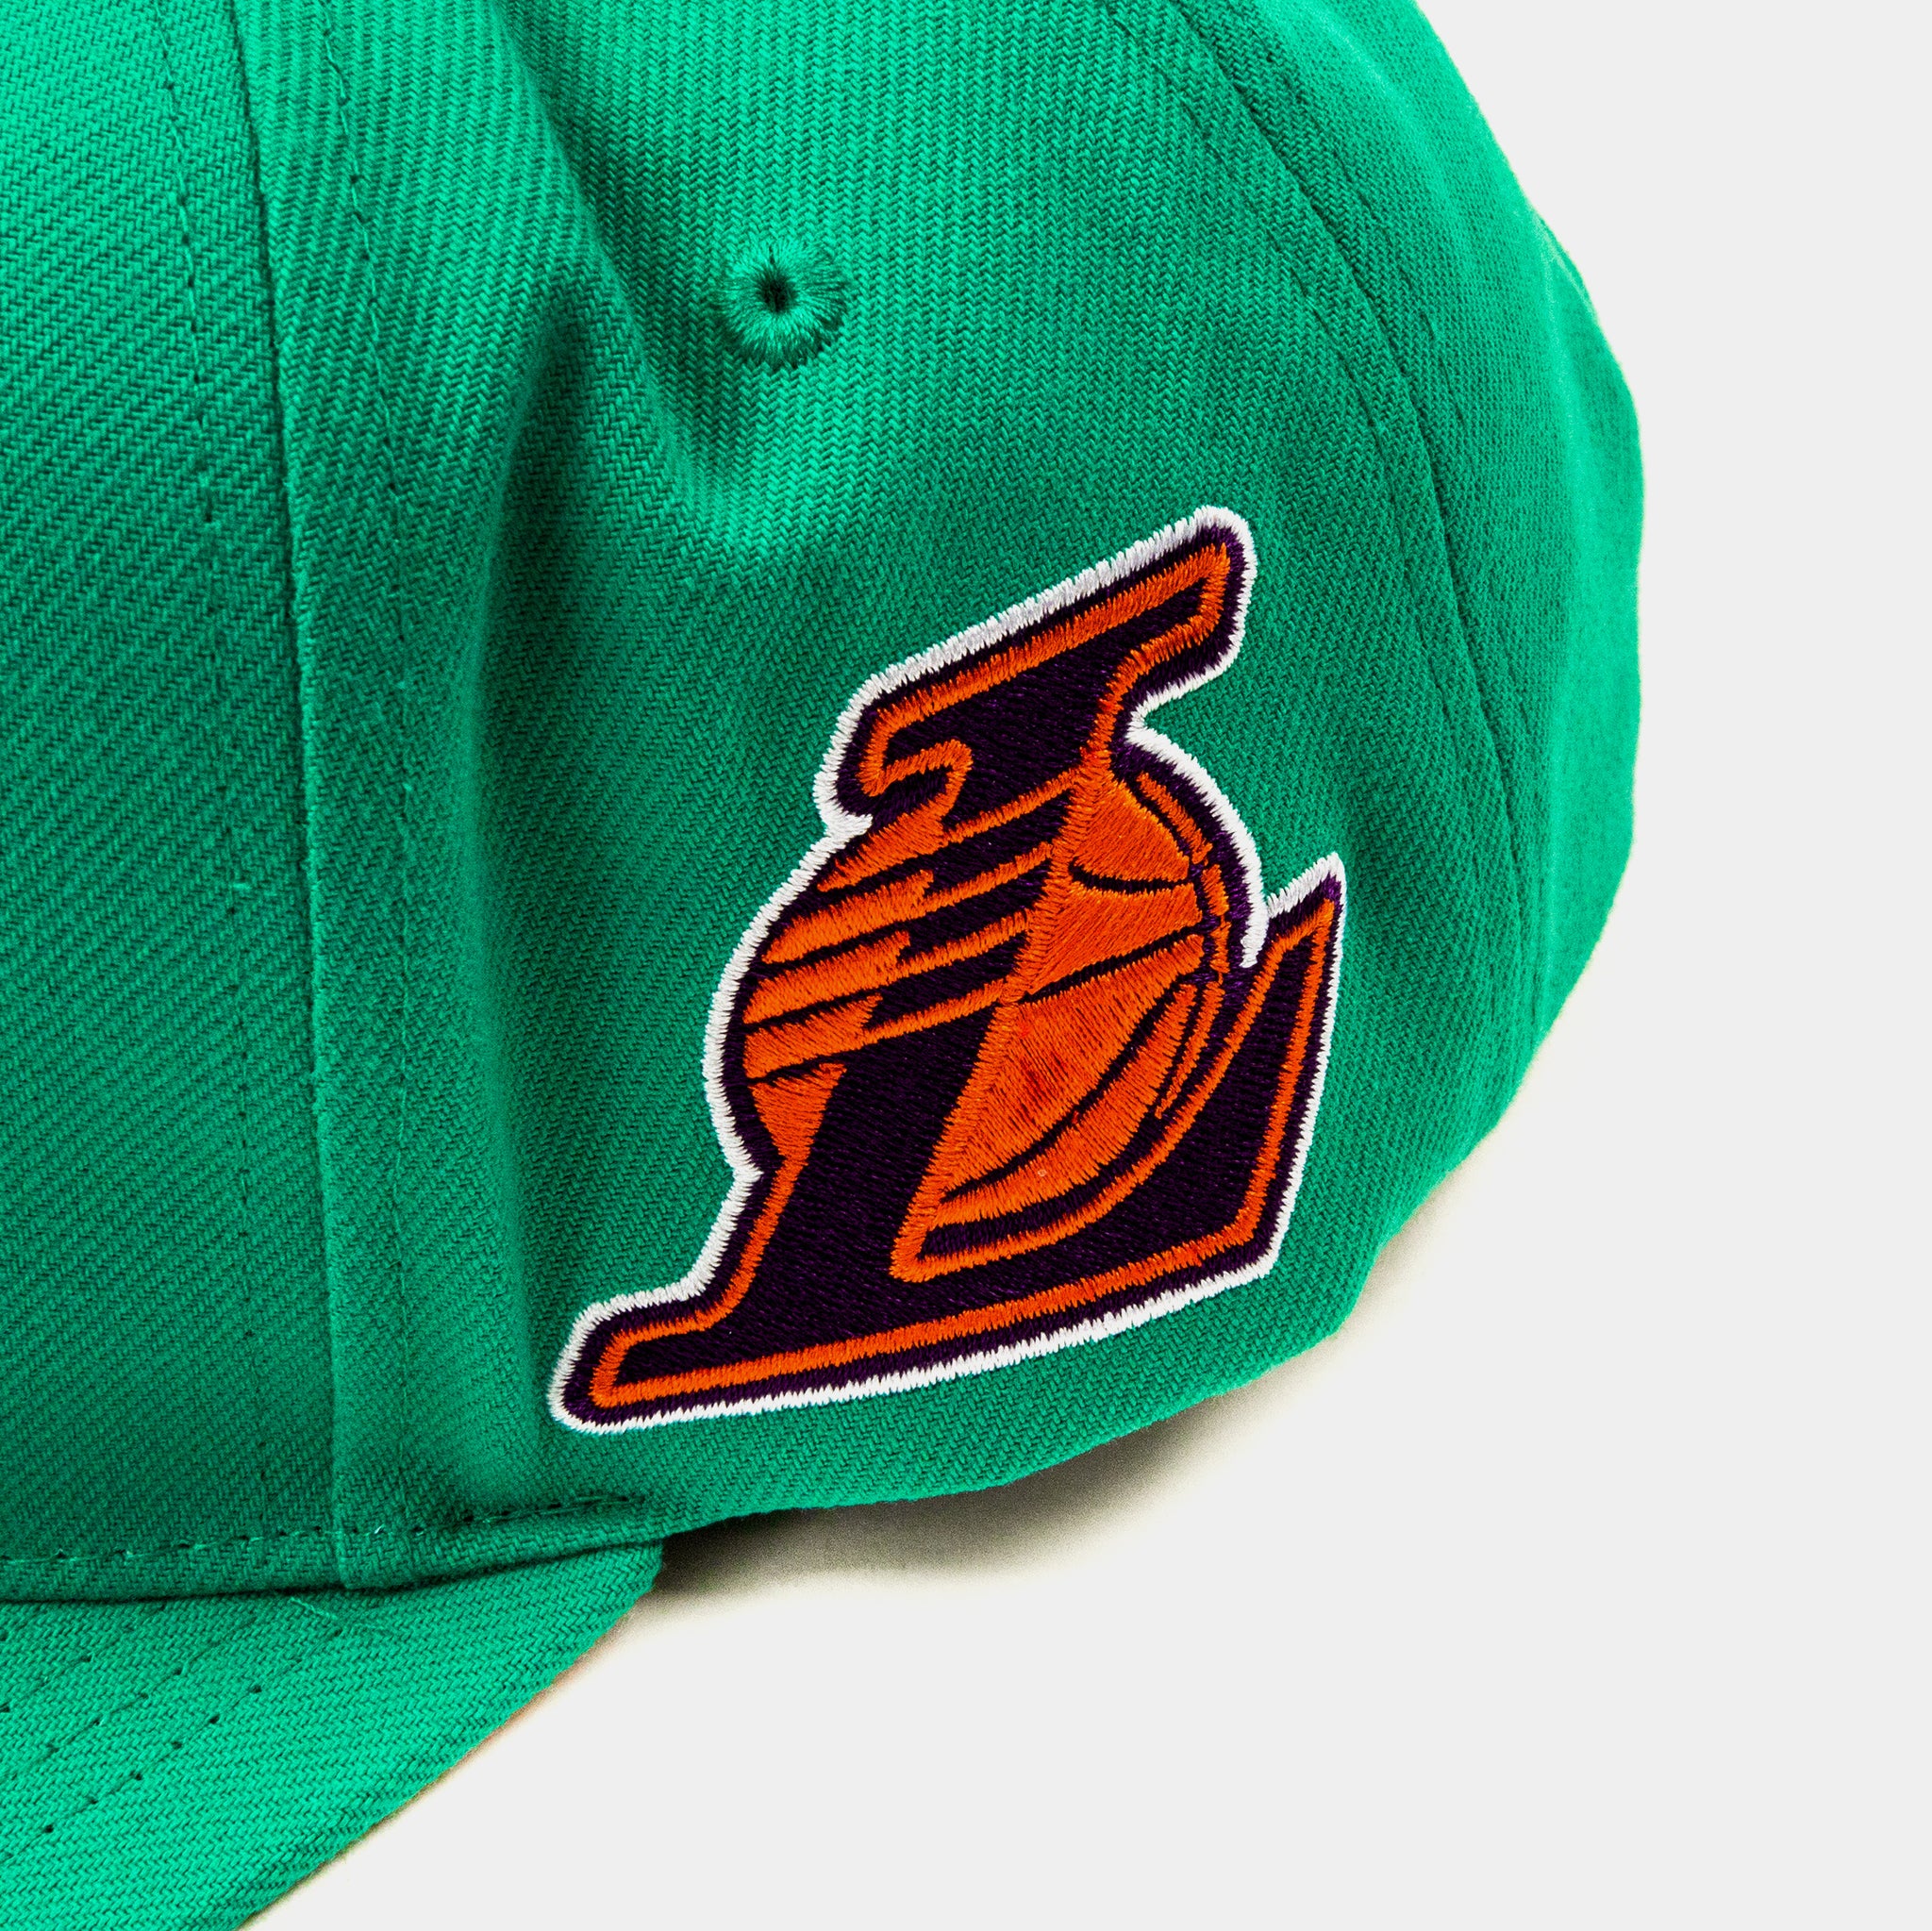 MITCHELL & NESS: BAGS AND ACCESSORIES, MITCHELL AND NESS BOSTON